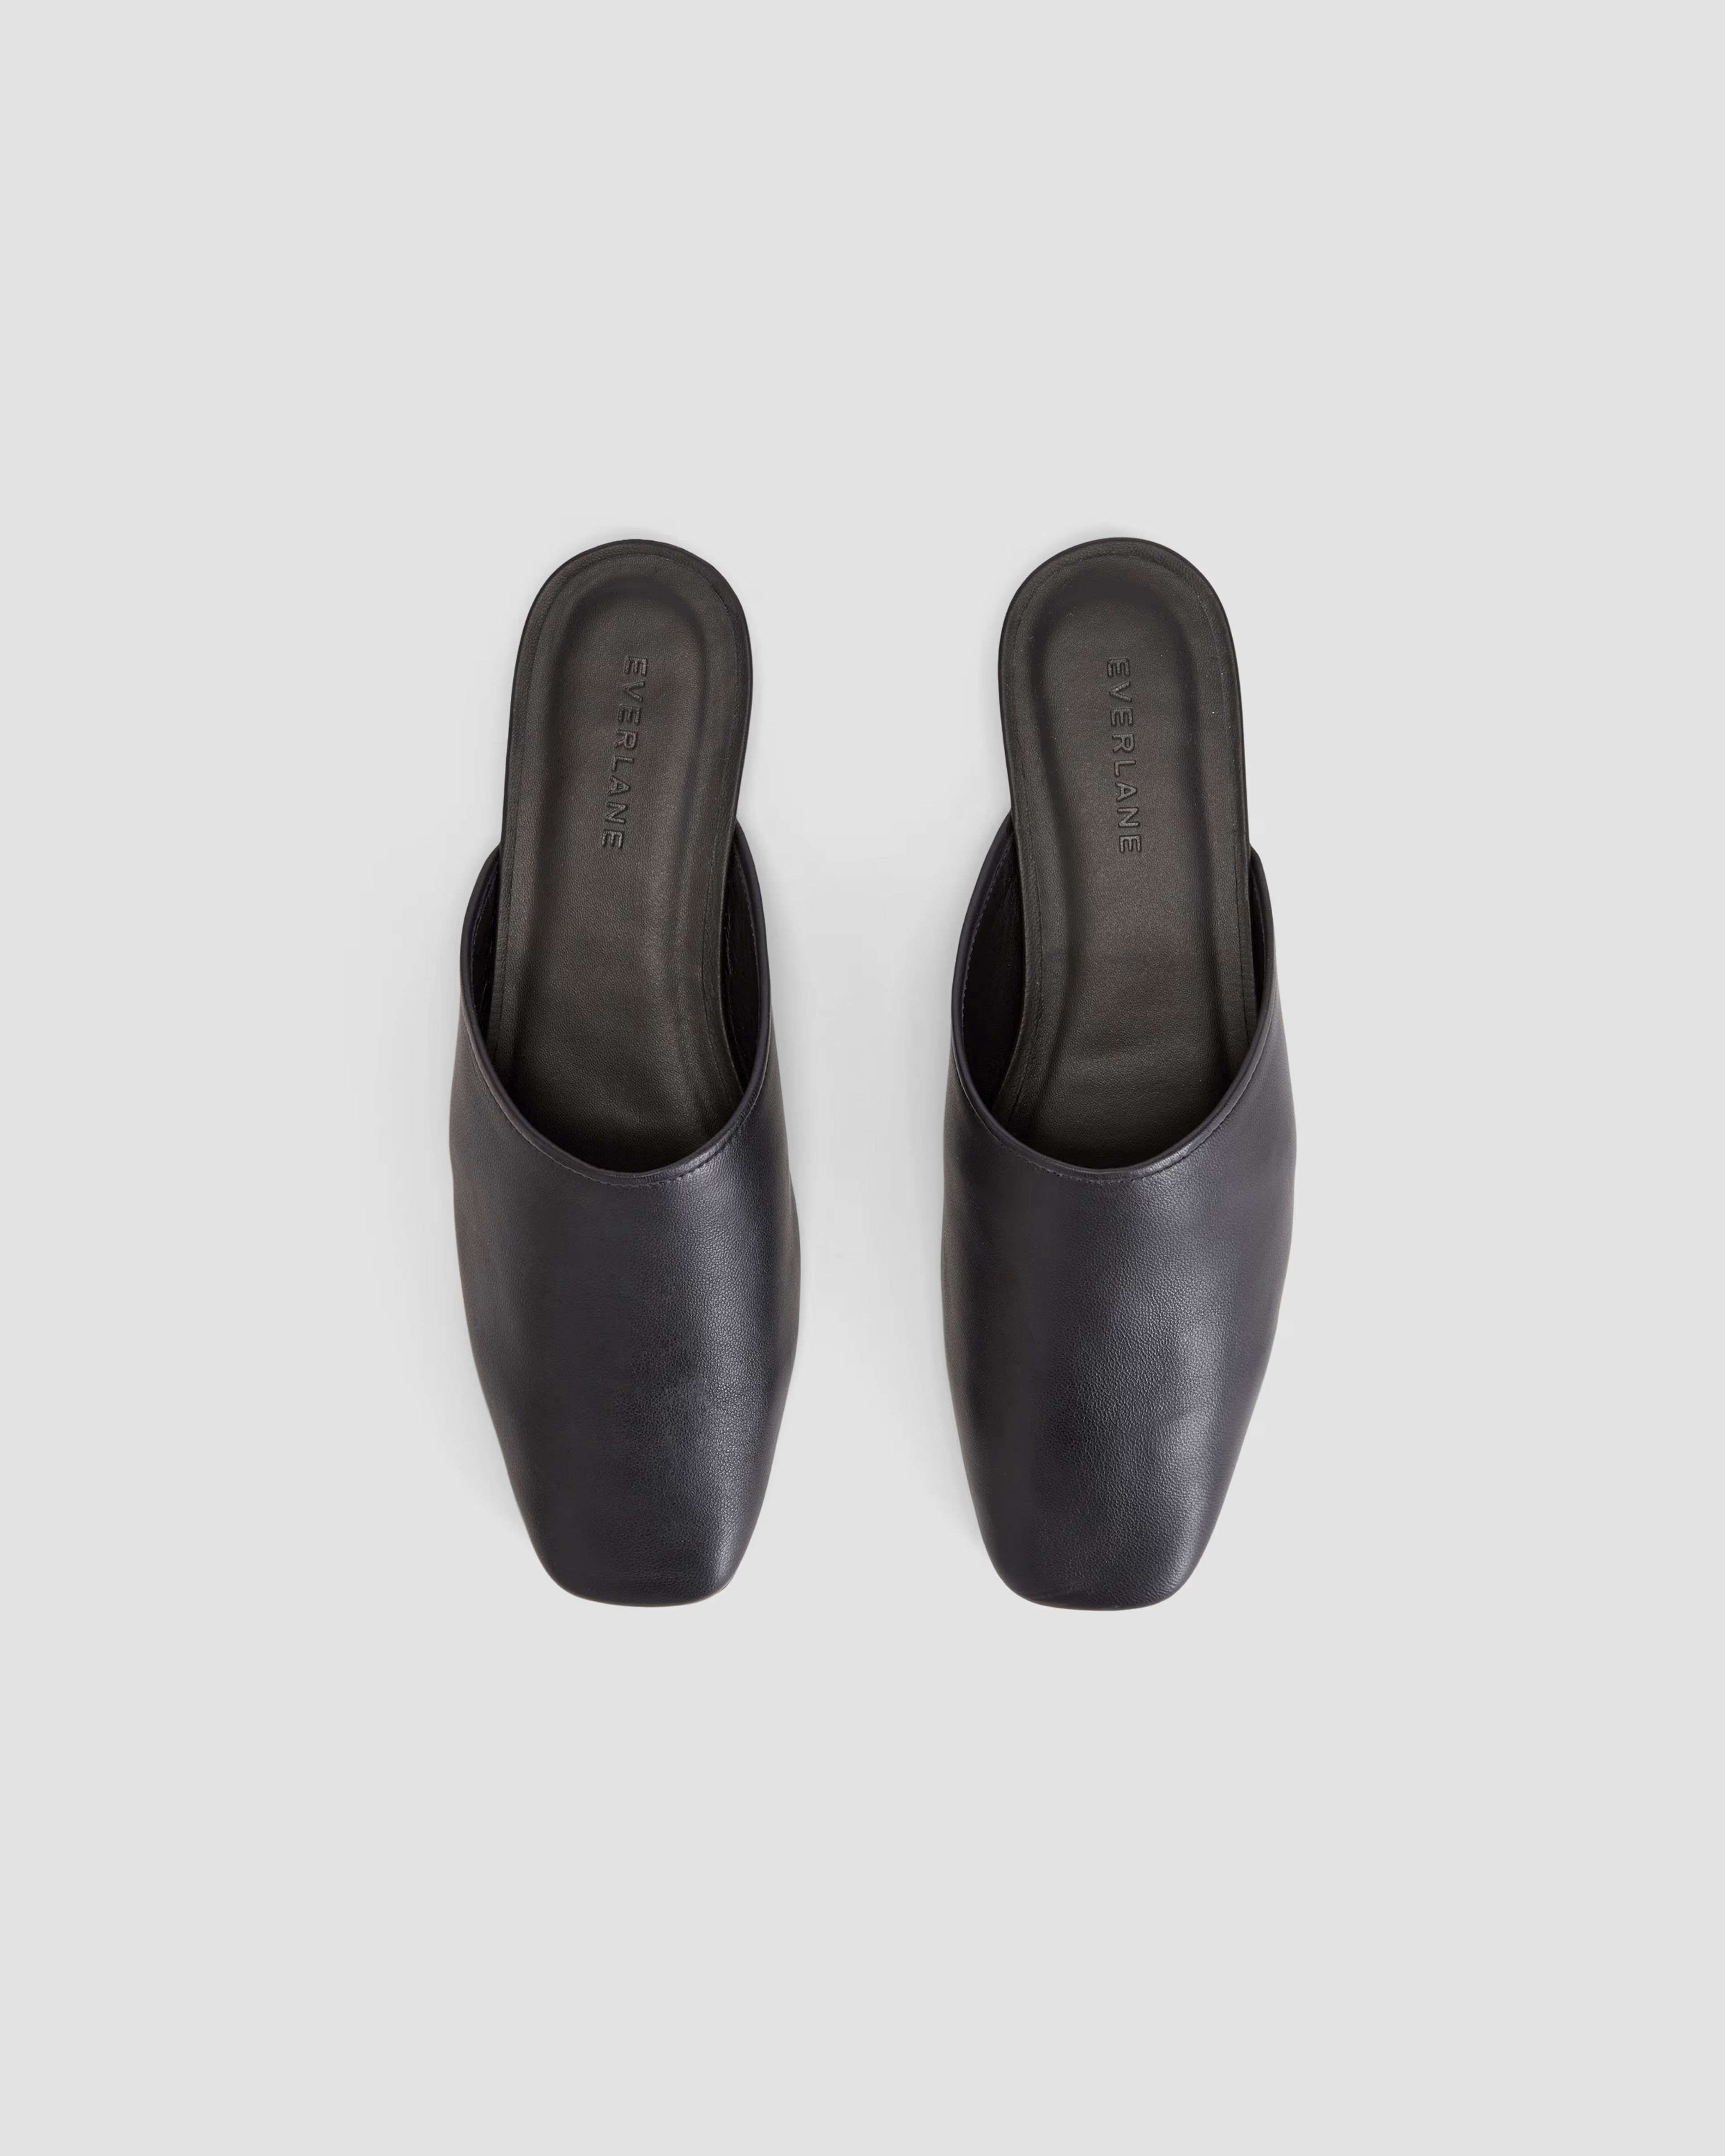 The Day Mule | Everlane